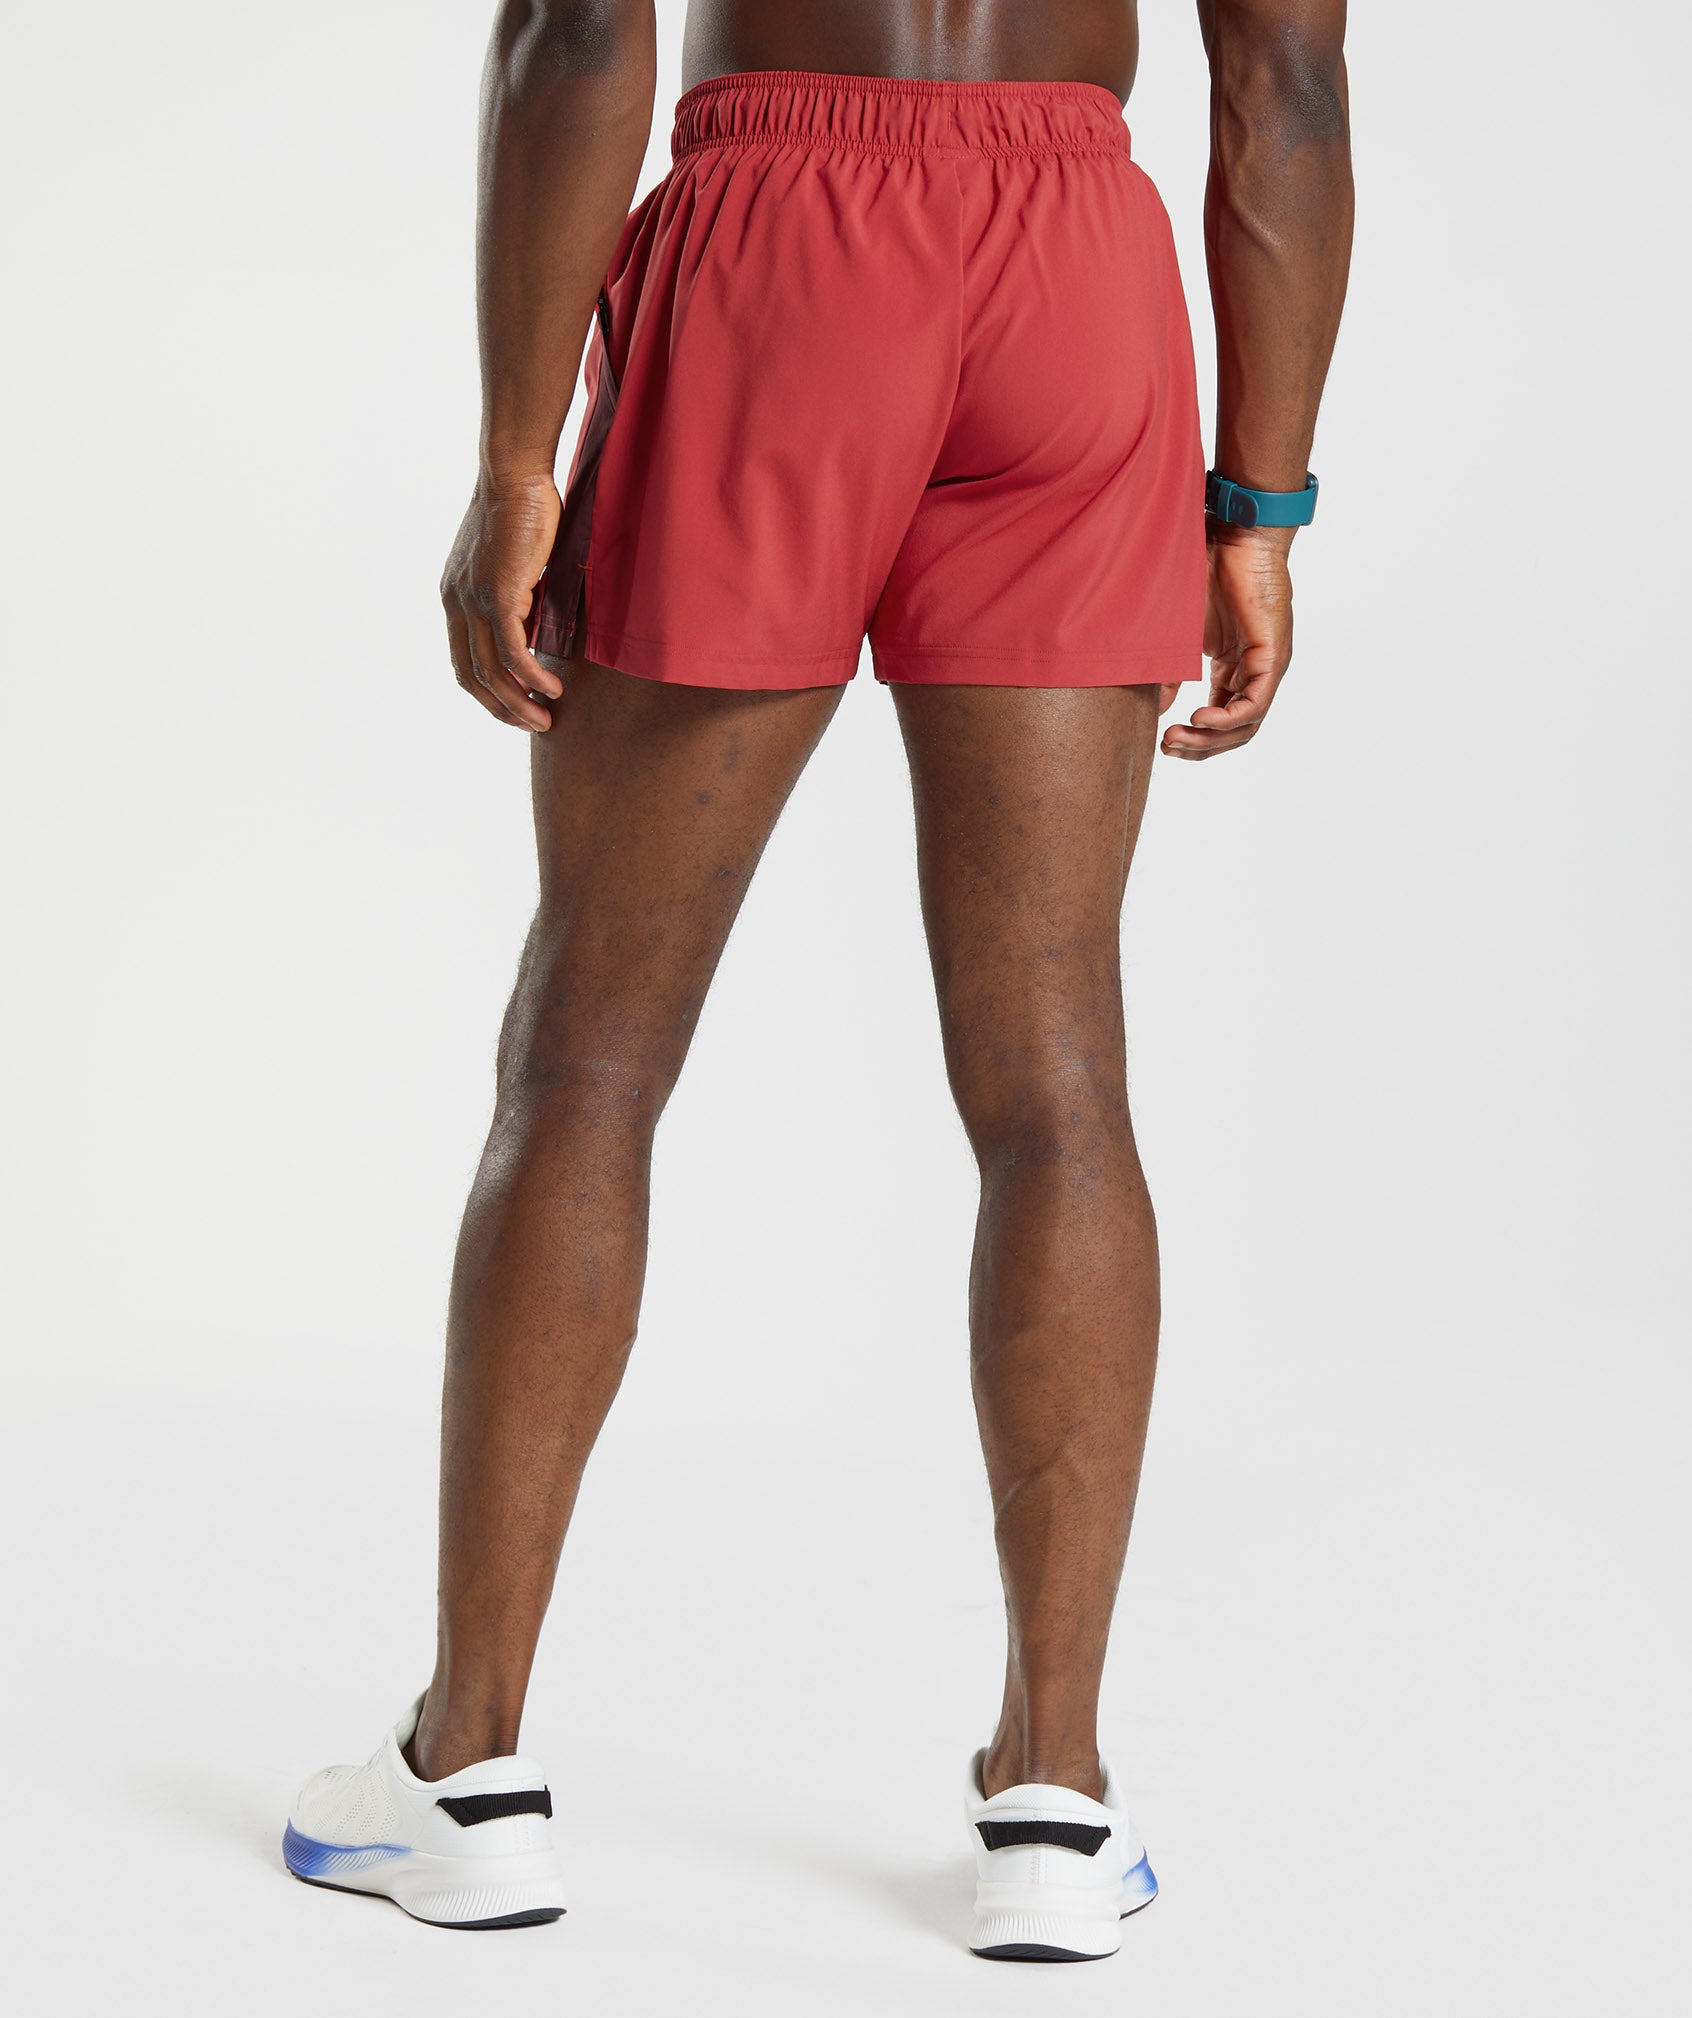 Sport 5" Shorts in Salsa Red/ Baked Maroon - view 2